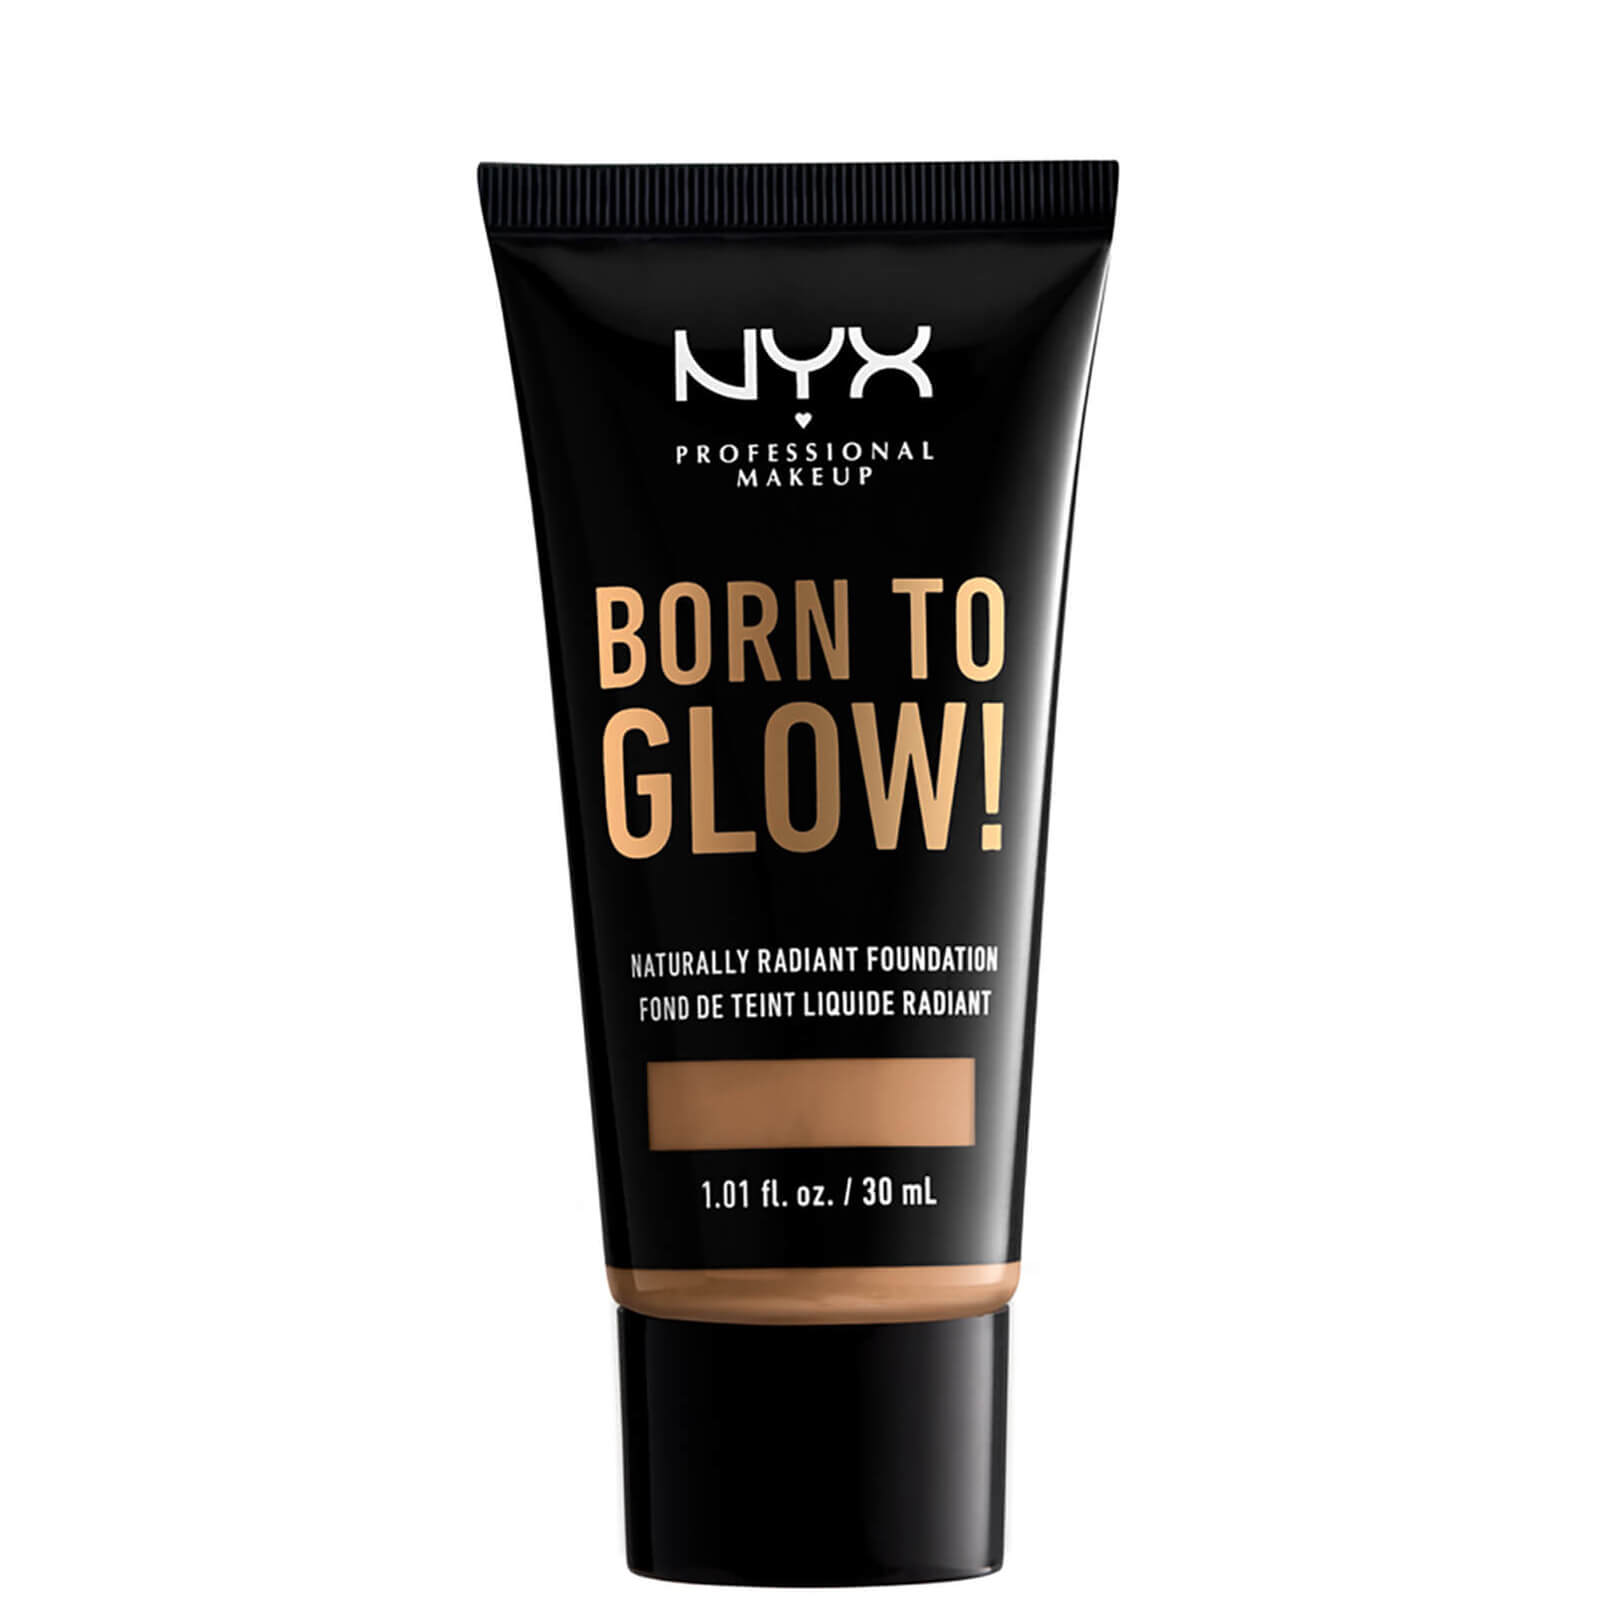 nyx professional makeup born to glow naturally radiant foundation 30ml (various shades) - camel